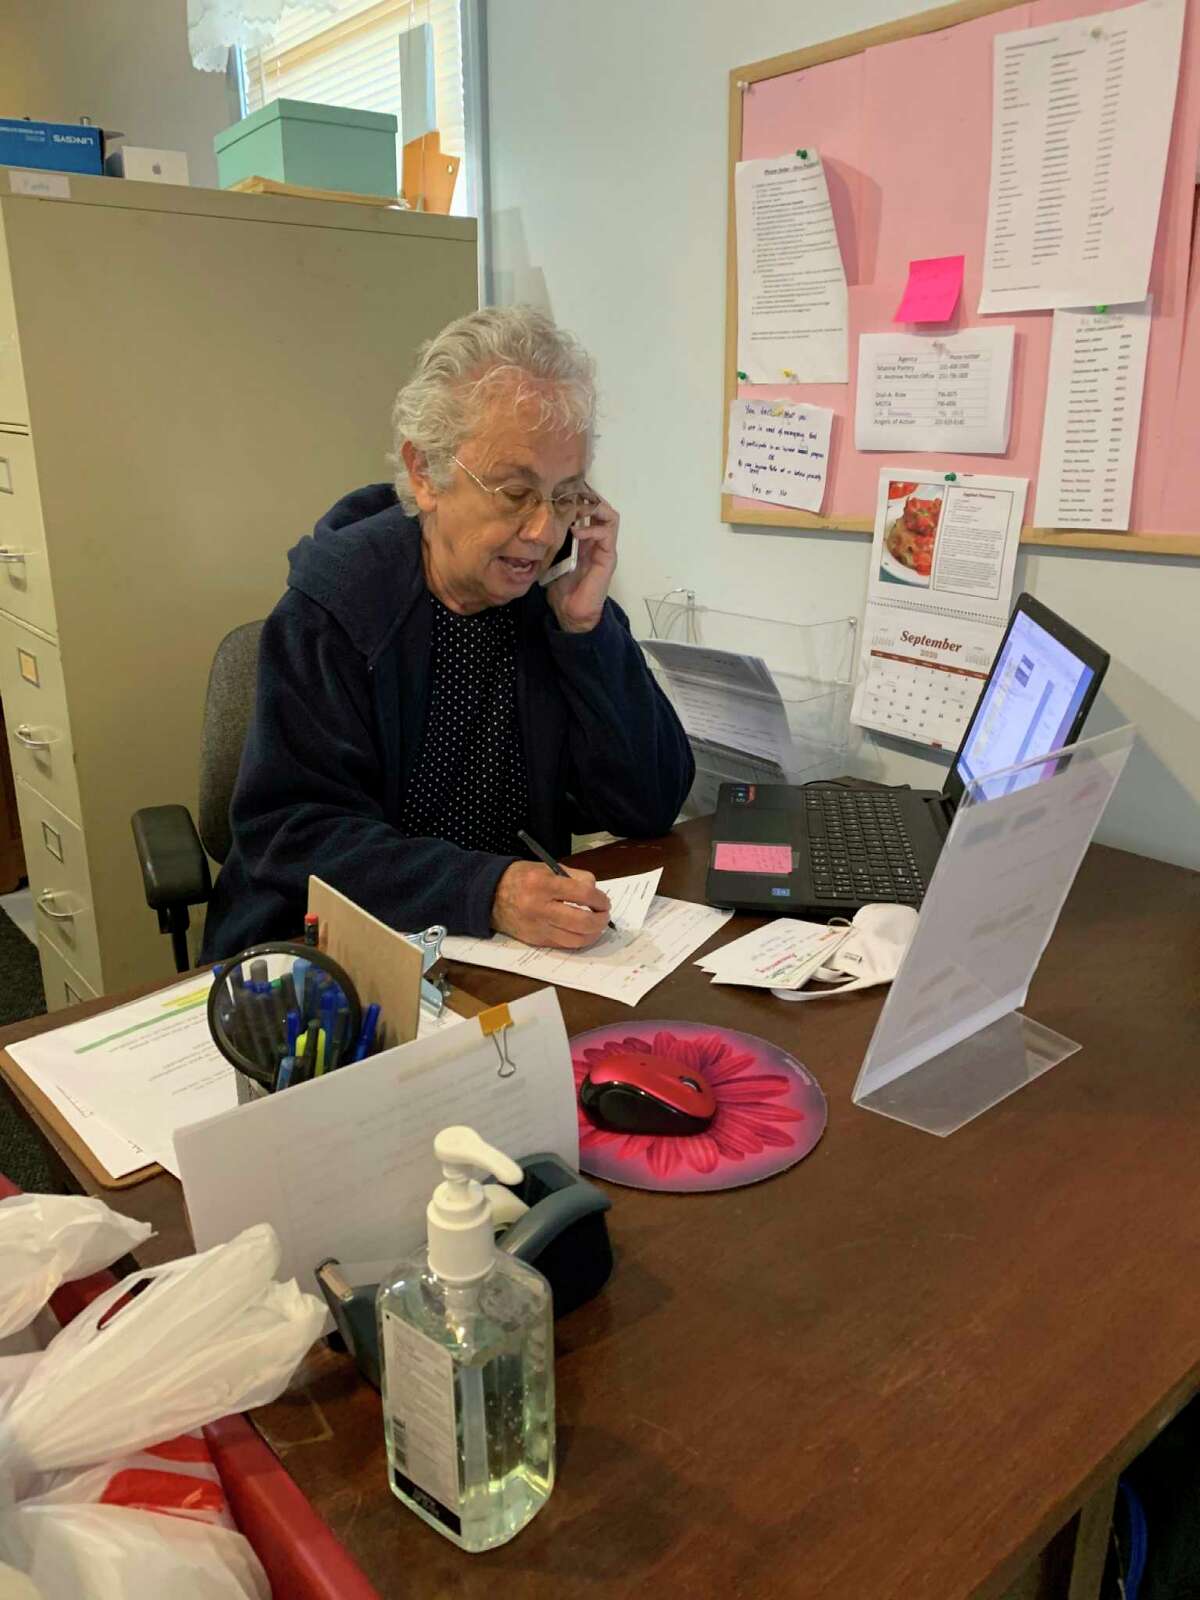 When not busy sorting bread, Sara Ham assists clients on the phone at Manna Pantry of Big Rapids, where she volunteers two days a week. (Submitted photo)